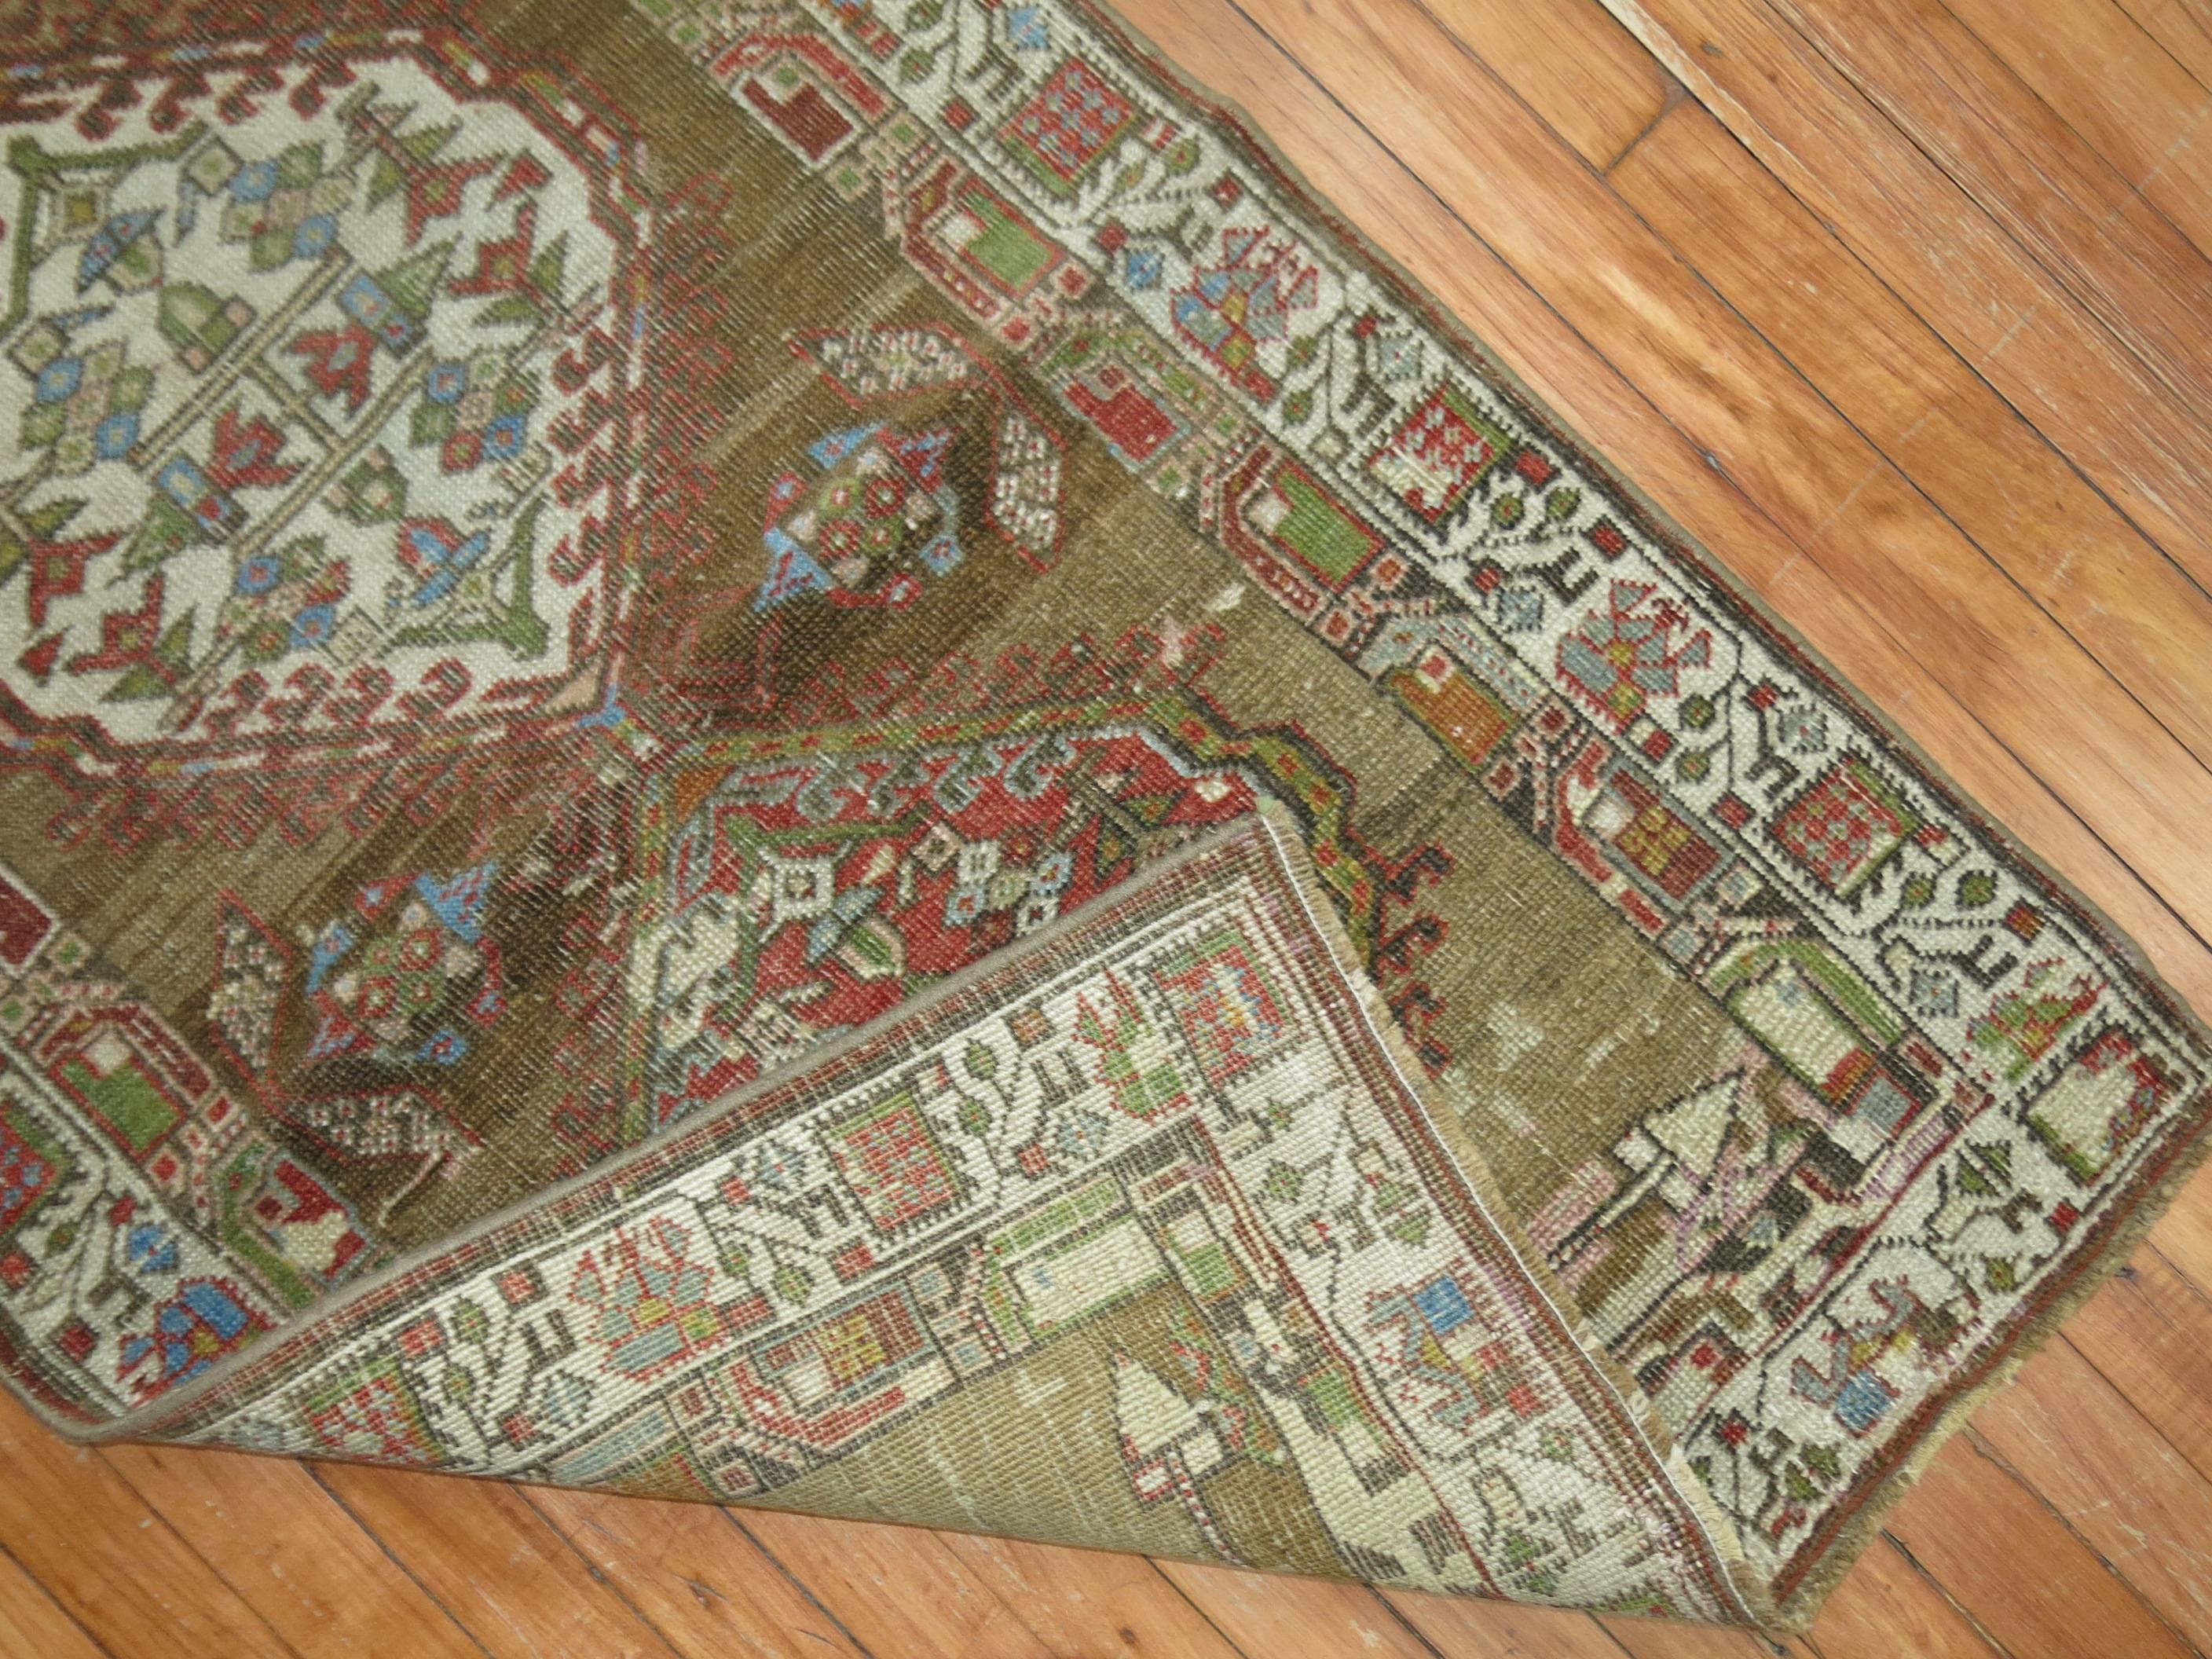 Antique Persian Serab runner with colorful accents on a brown ground.

Measures: 2'7'' x 8'7'' circa 1910

Serab rugs are known for their fine long runners with a characteristic camel ground and lozenge-shaped medallions. These rugs are woven in